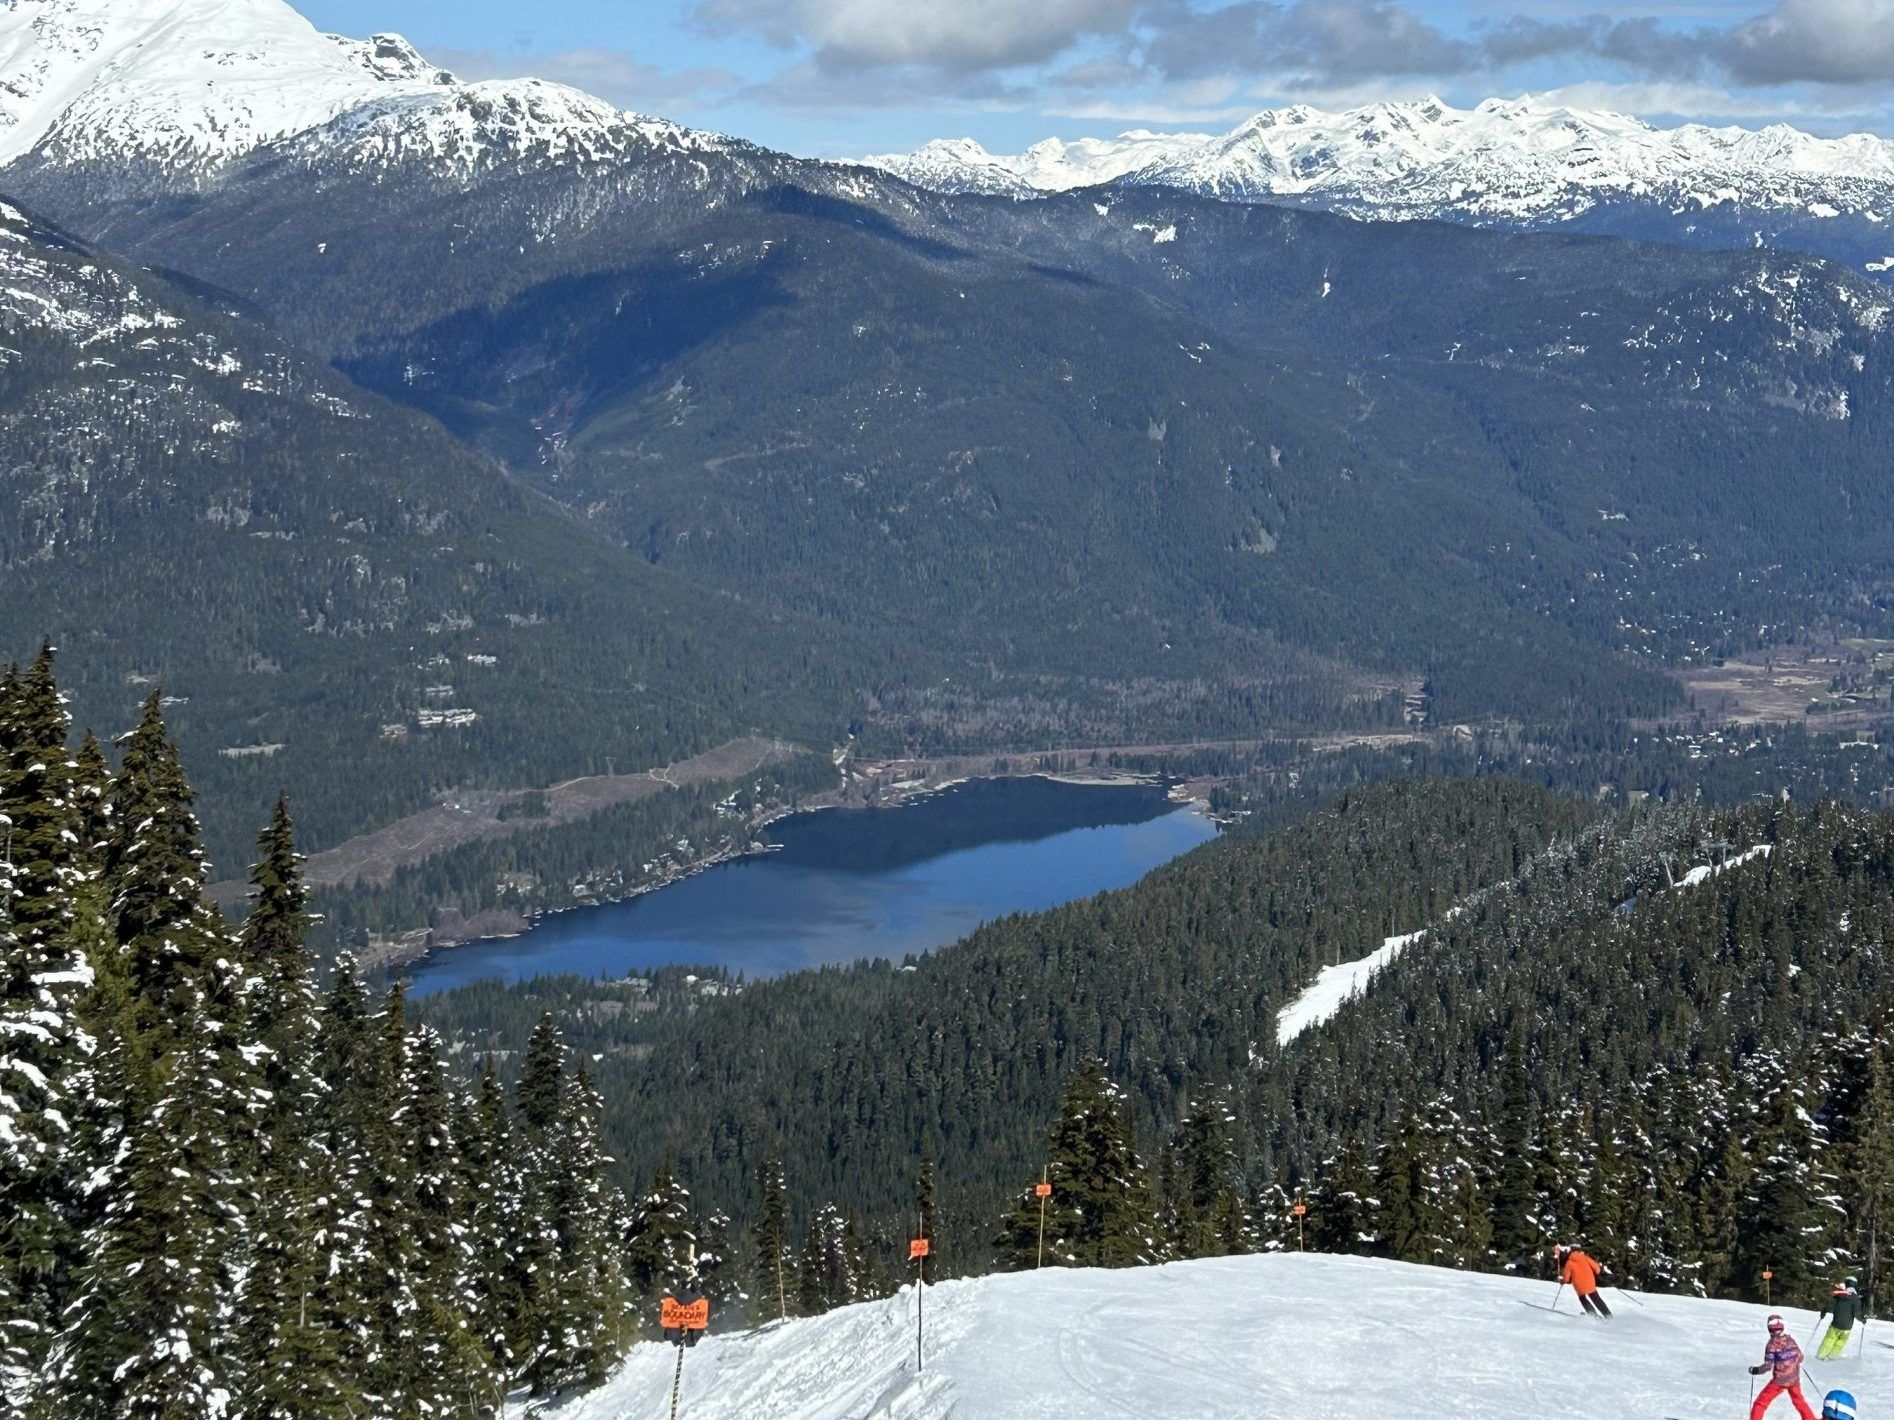 Whistler is open well into May, so there’s still lots of time to get your ski on